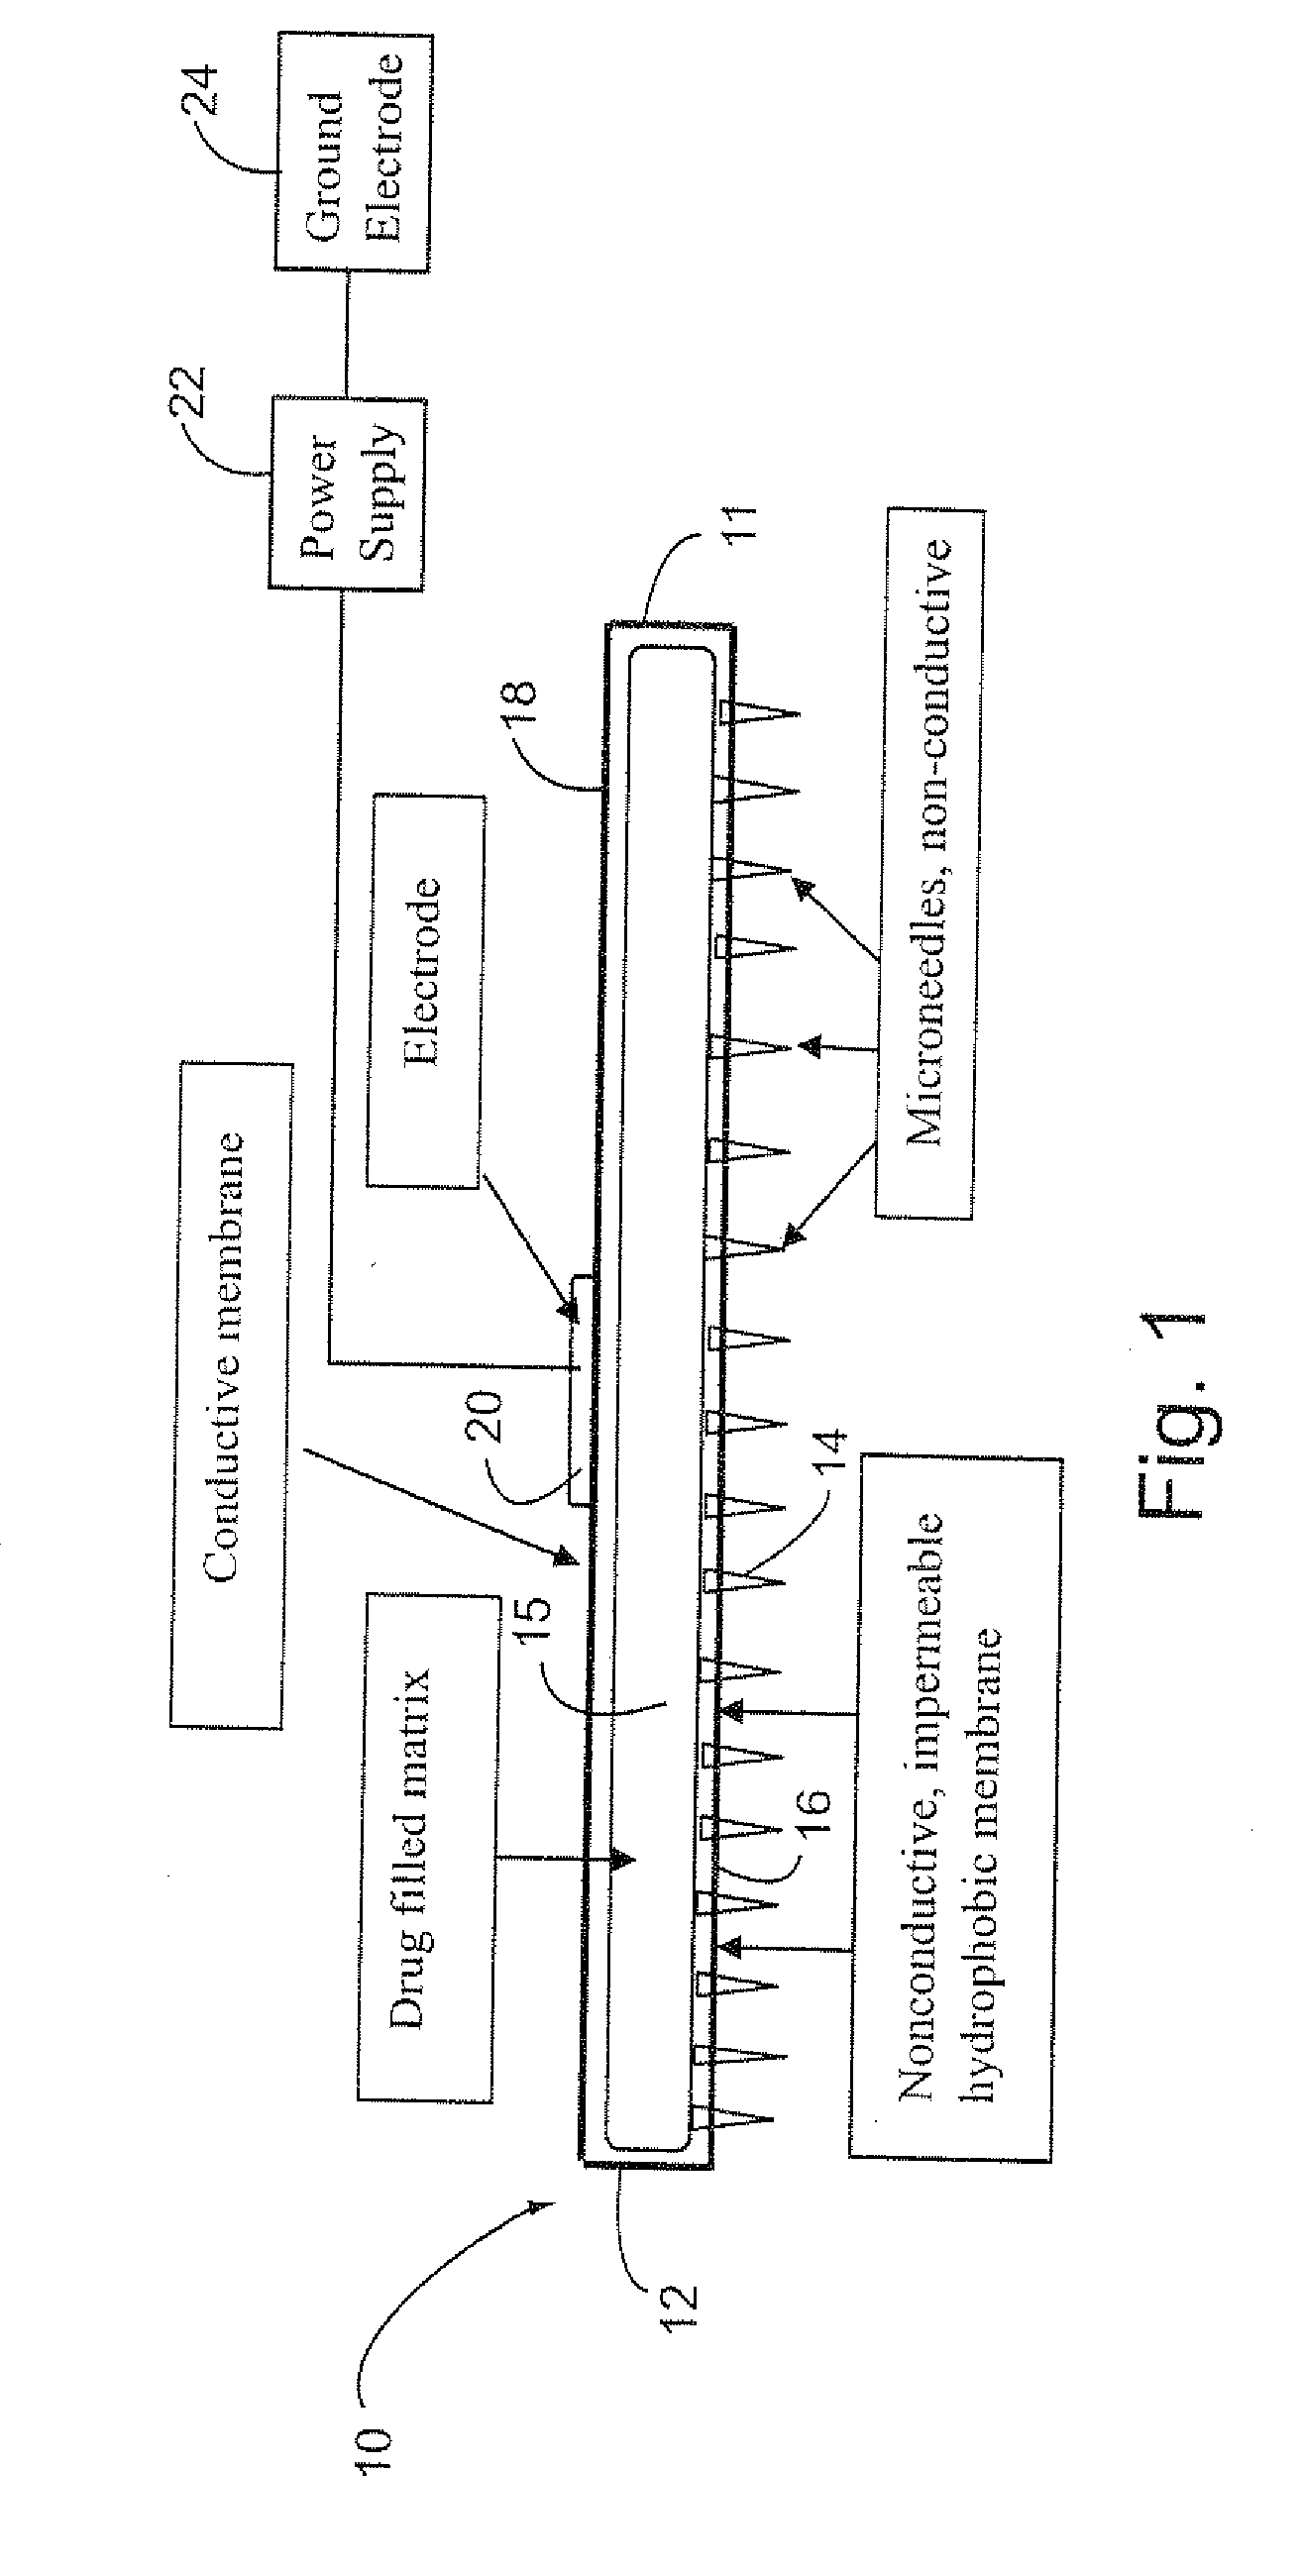 Electrokinetic system and method for delivering methotrexate